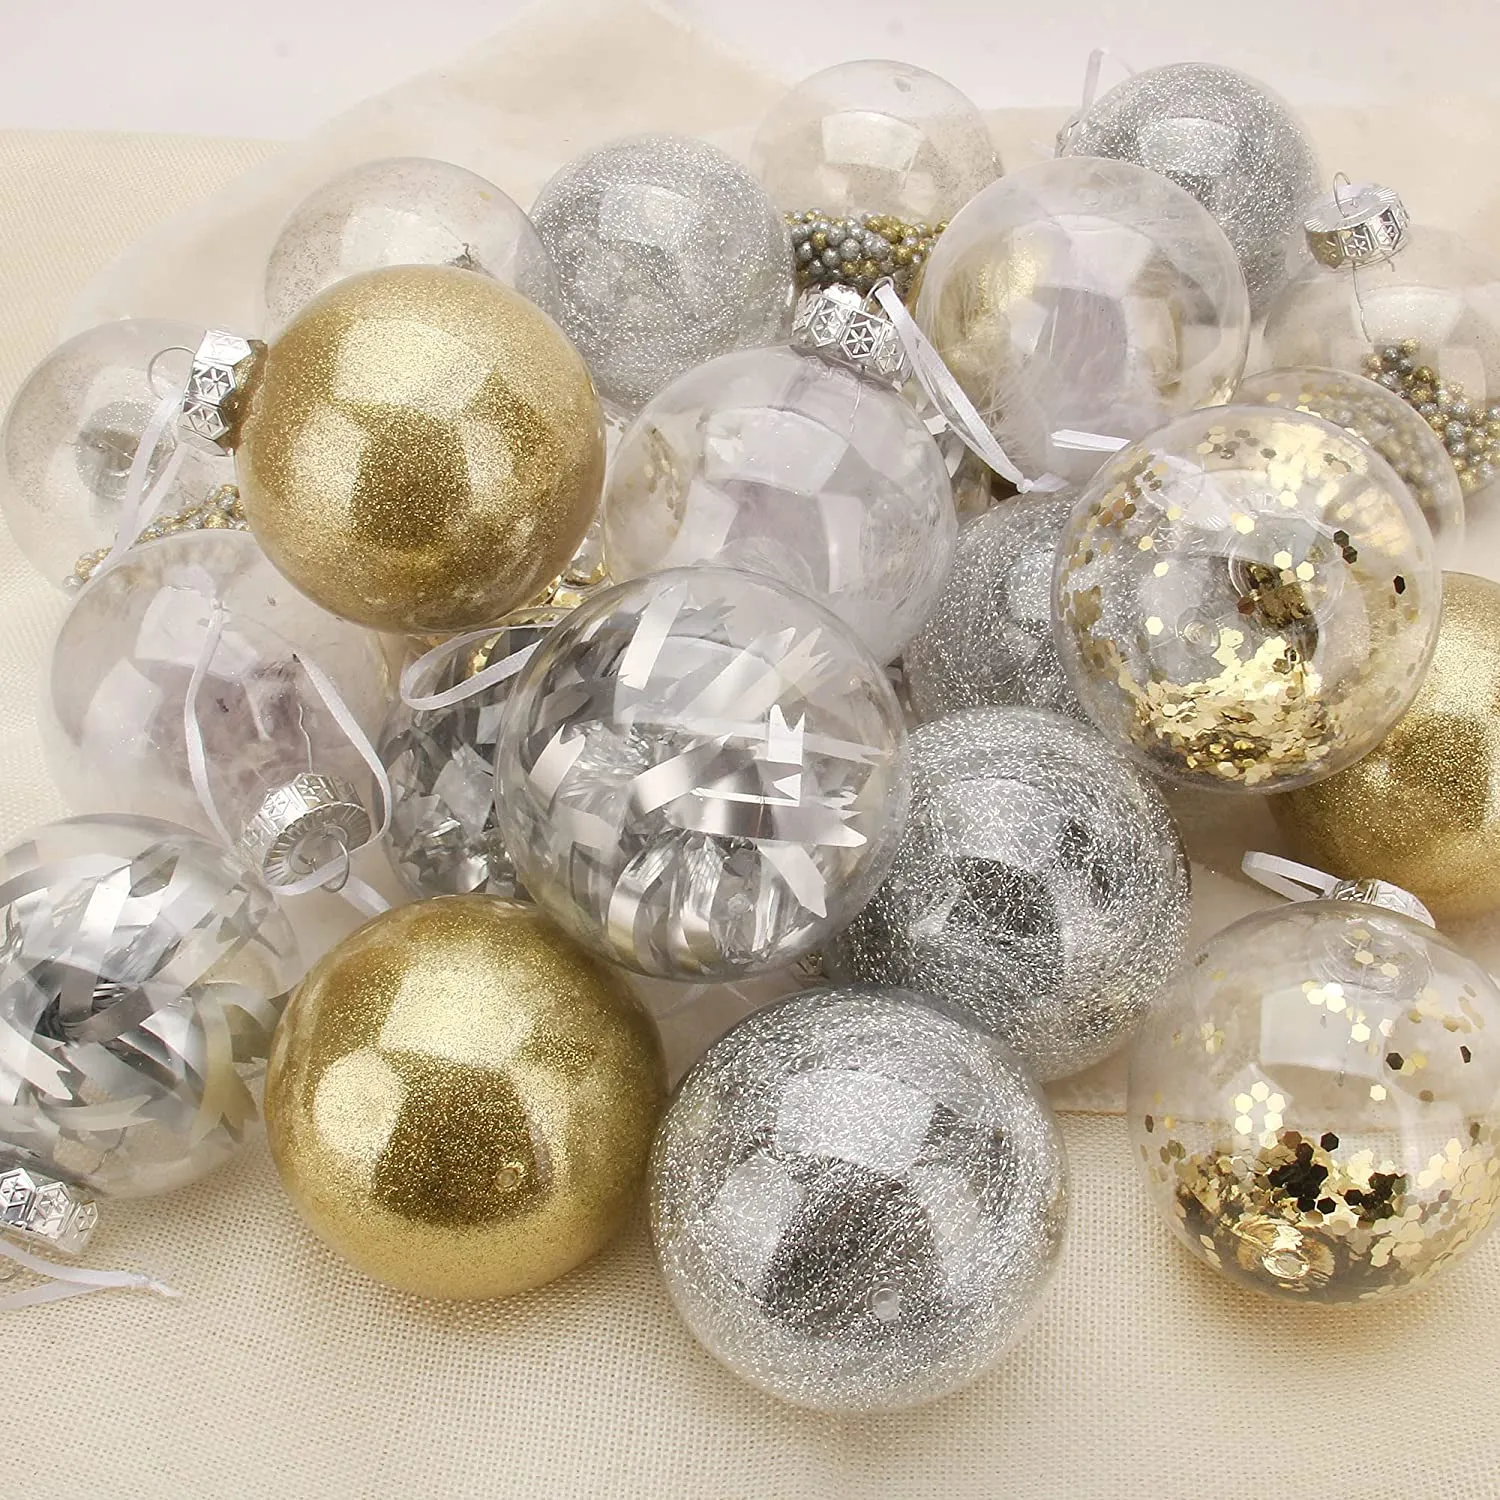 24pcs Plastic Clear Ball Ornaments with Filling Christmas Ornaments, Assorted Shatterproof Christmas Ornaments,Blue